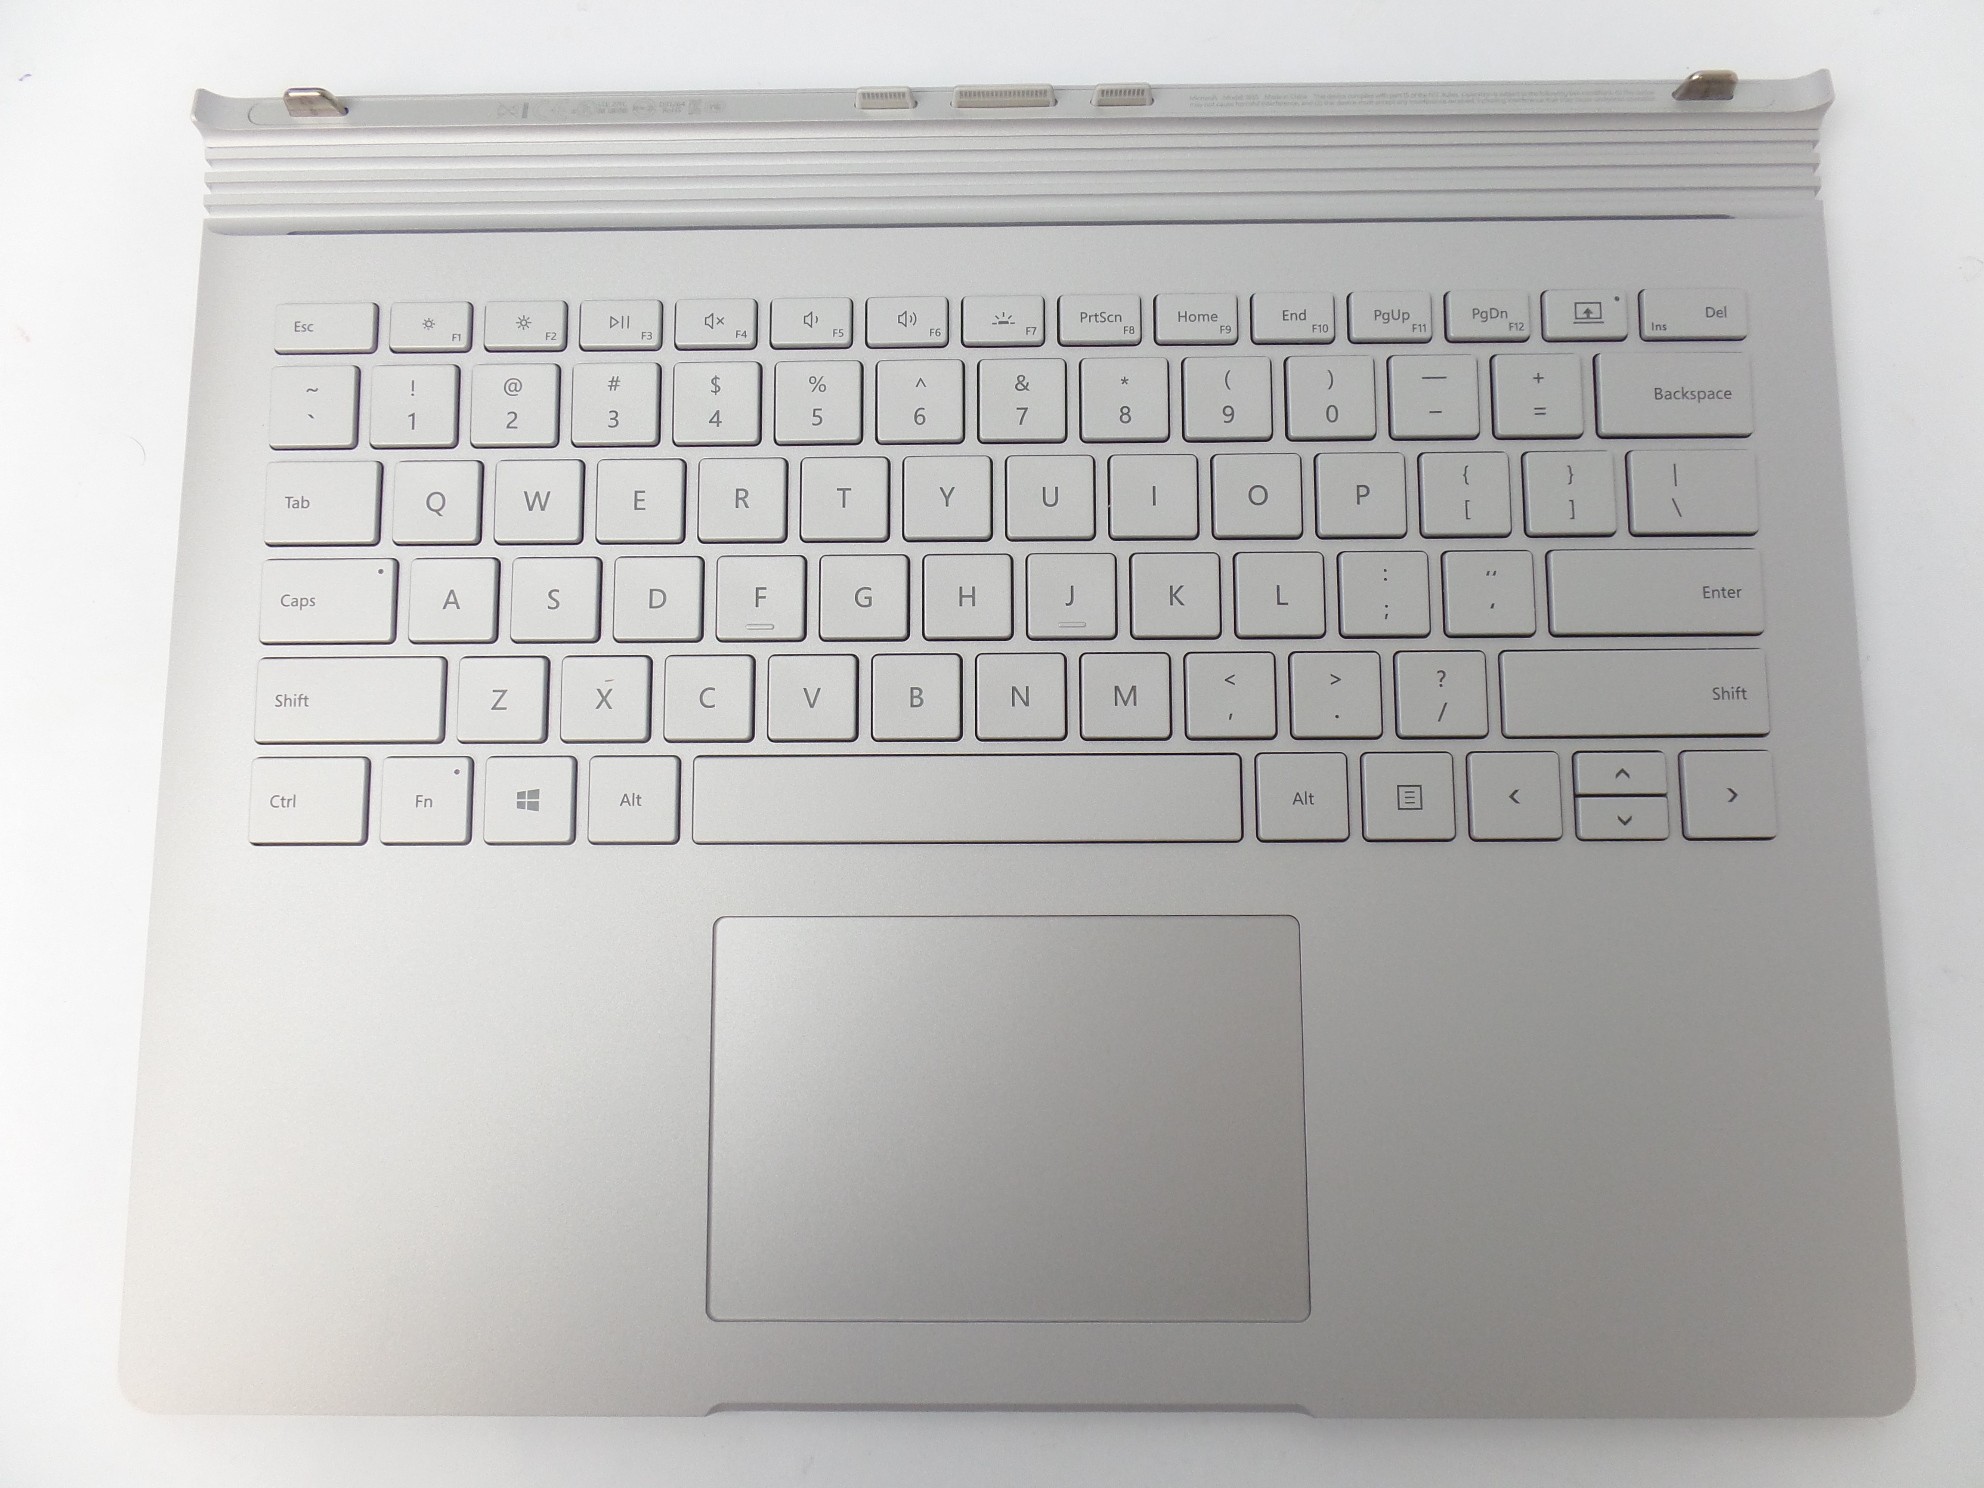 Keyboard Performance Base 1835 for Surface Book 2nd Gen 13.5" GTX 1050 - Read